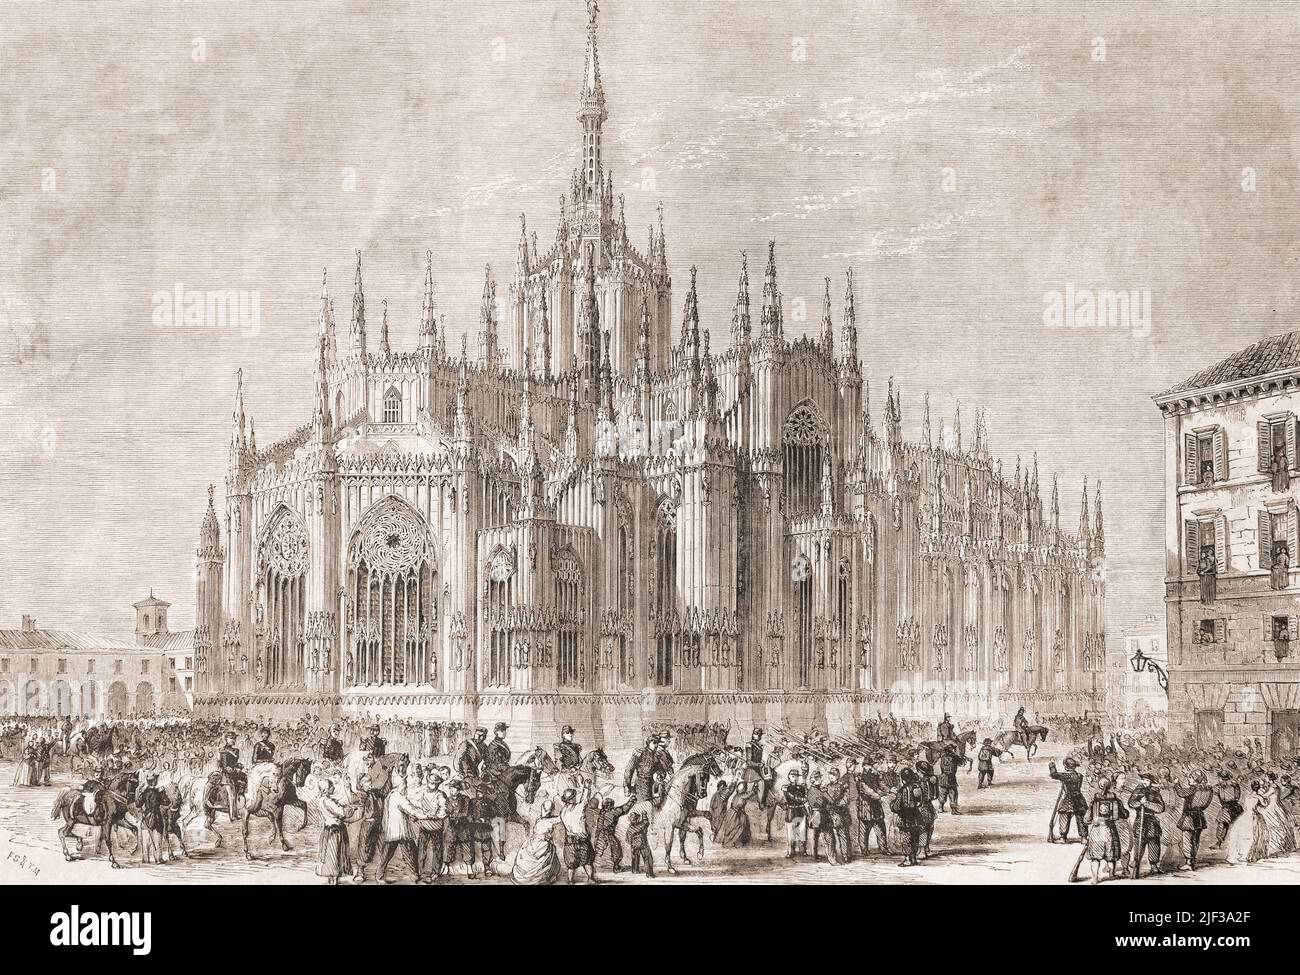 The Milanese welcoming the French and Sardinians after they had ousted the Austrians during The Second Italian War of Independence, aka the Franco-Austrian War, the Austro-Sardinian War or Italian War of 1859, fought by the Second French Empire and the Savoyard Kingdom of Sardinia against the Austrian Empire in 1859.  From L'Univers Illustre, published Paris, 1859. Stock Photo